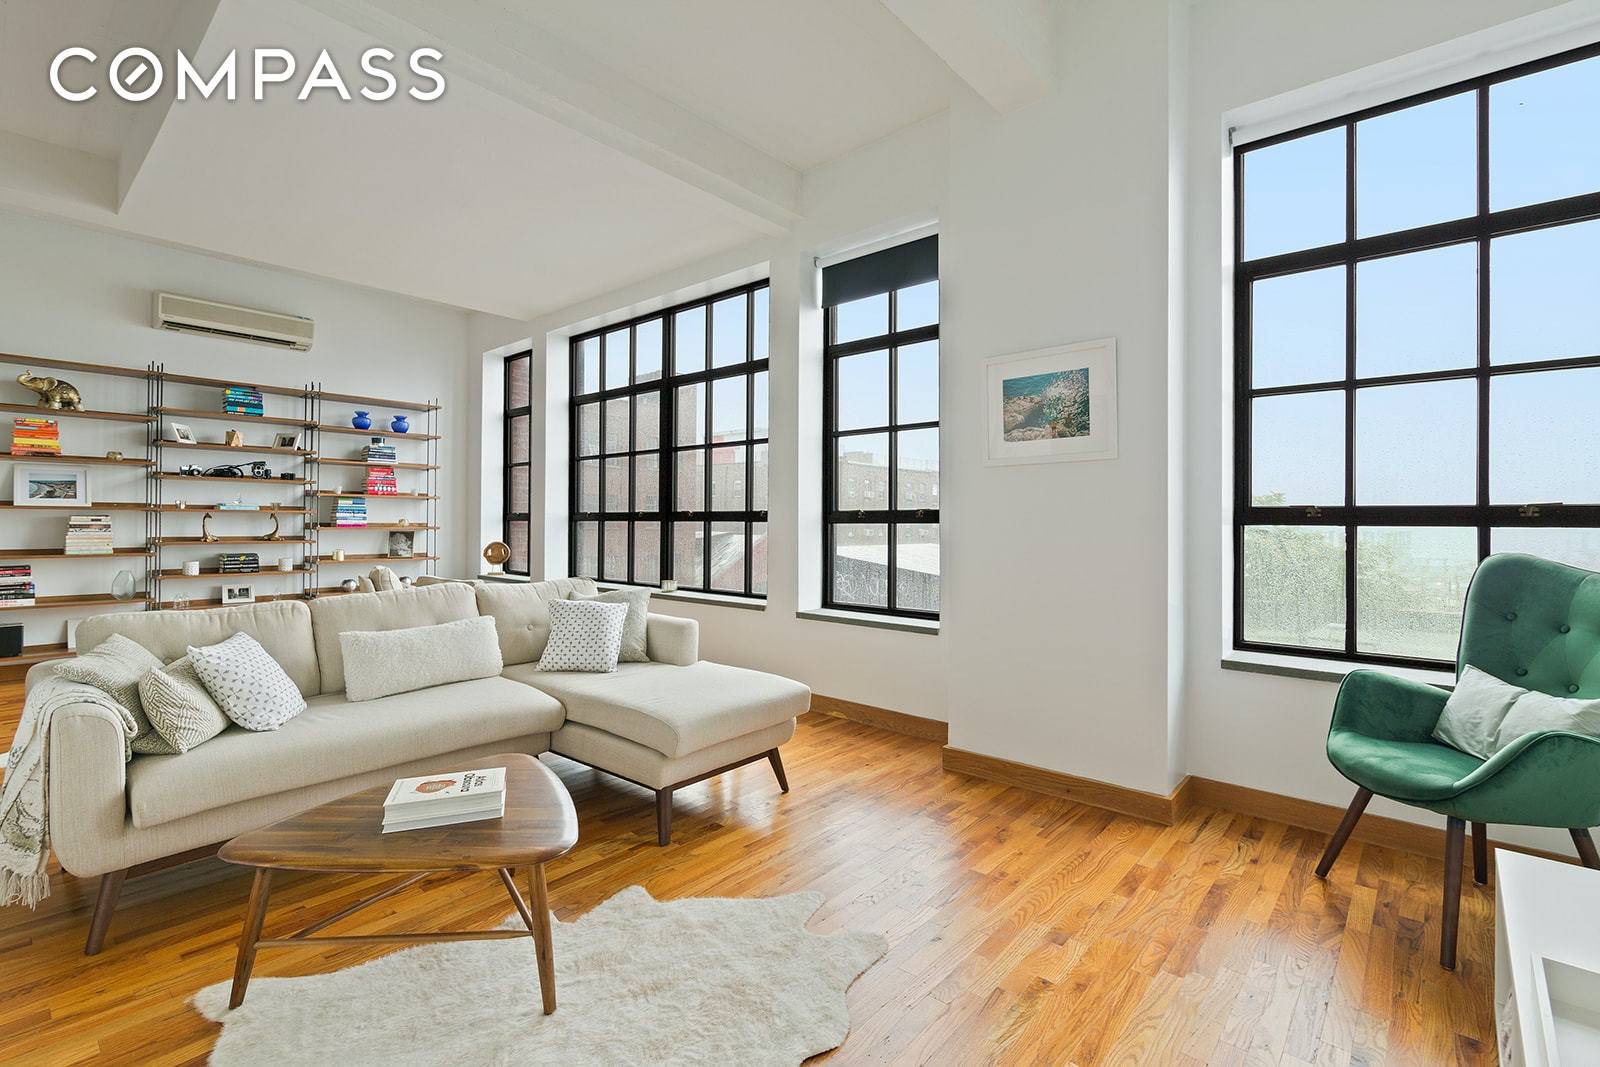 This convertible two bedroom loft has Manhattan and East River views flooding the apartment with natural light.